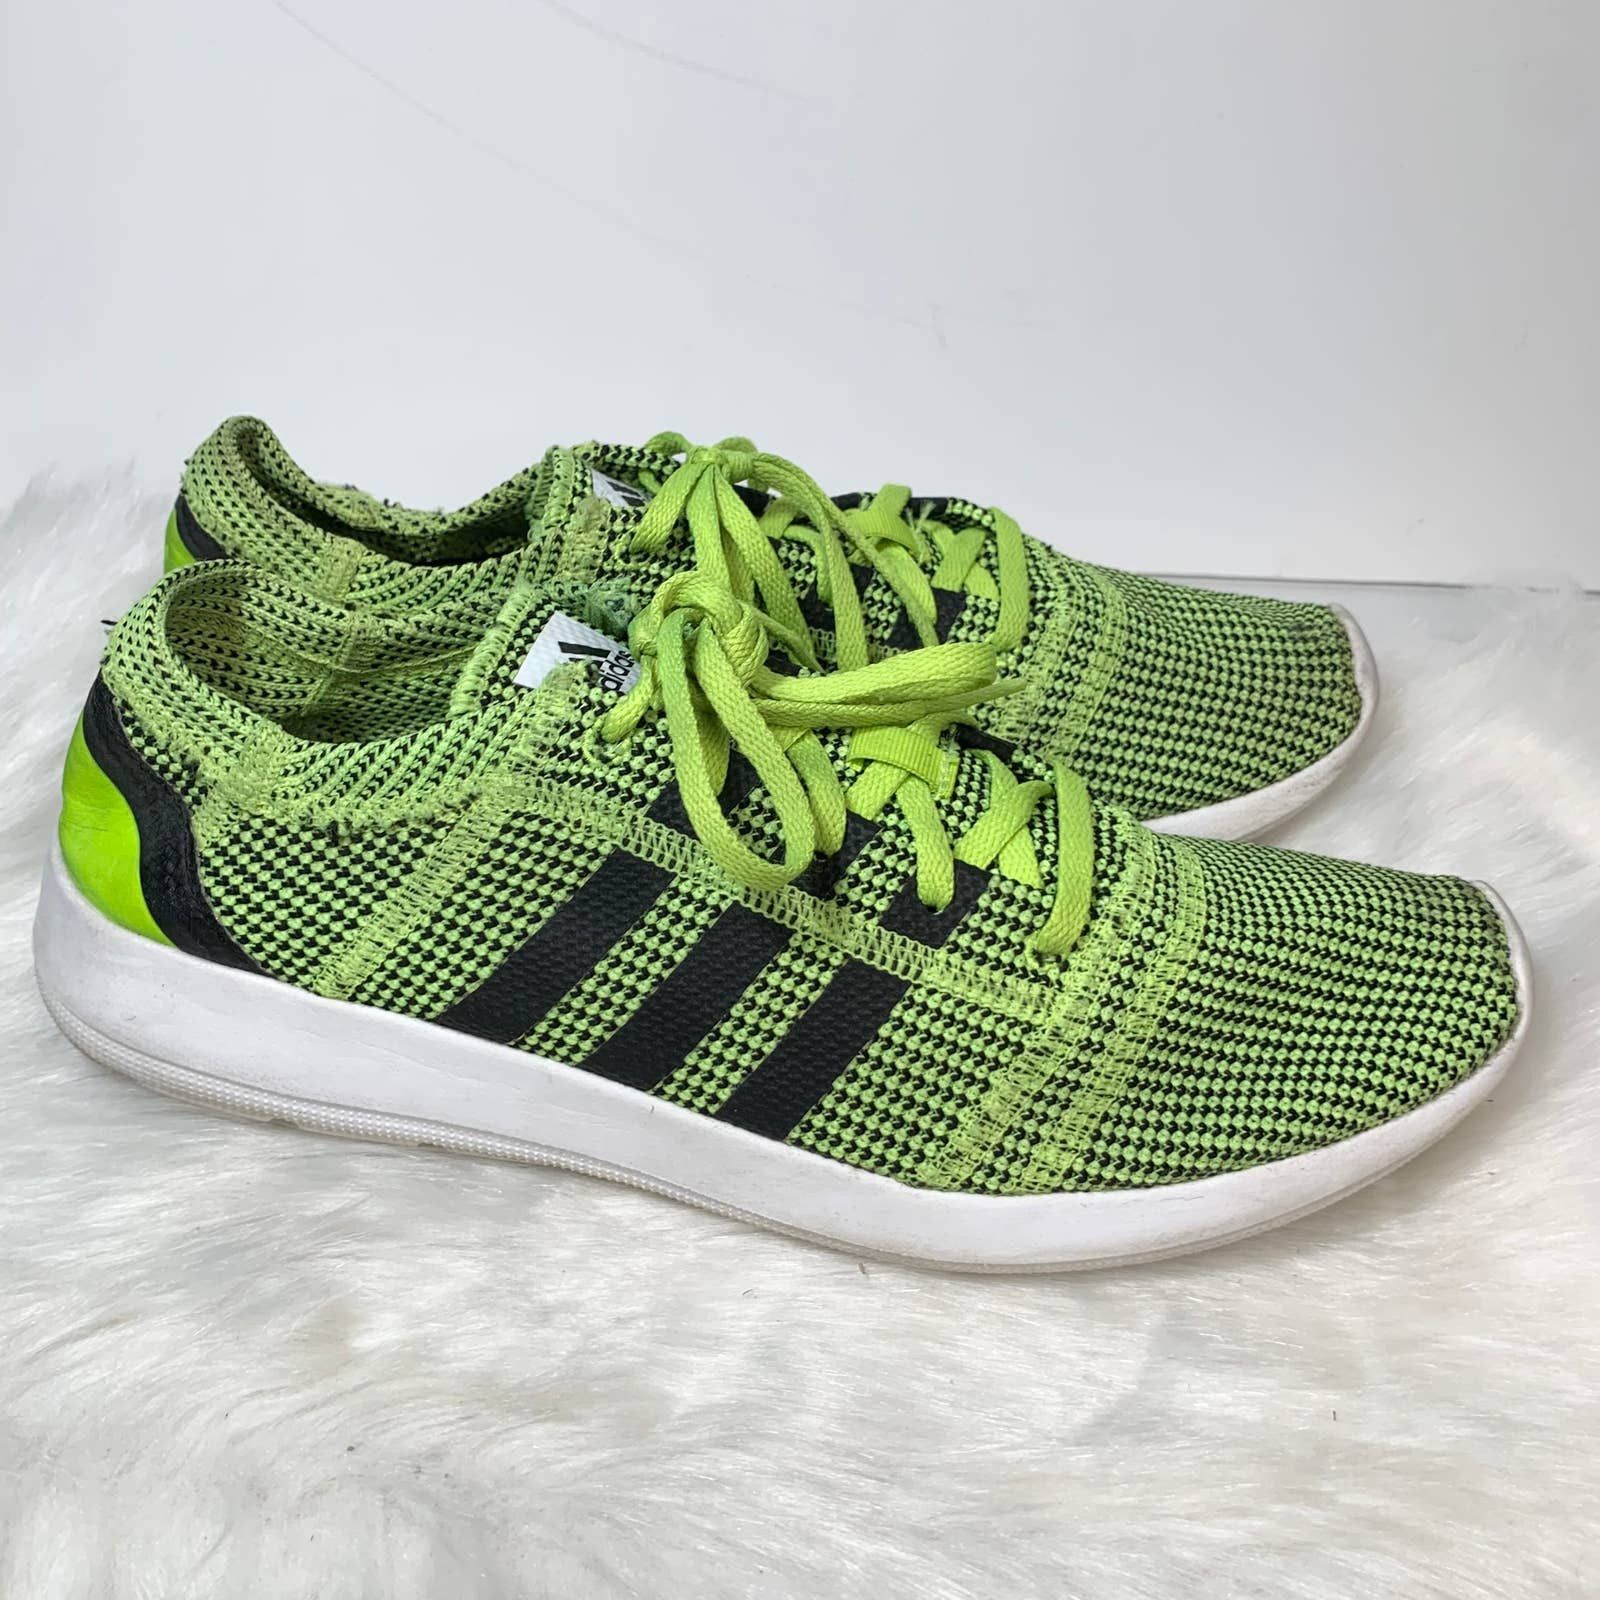 New Womens 10 ADIDAS Element Refine Tricot Sneakers Running Shoes